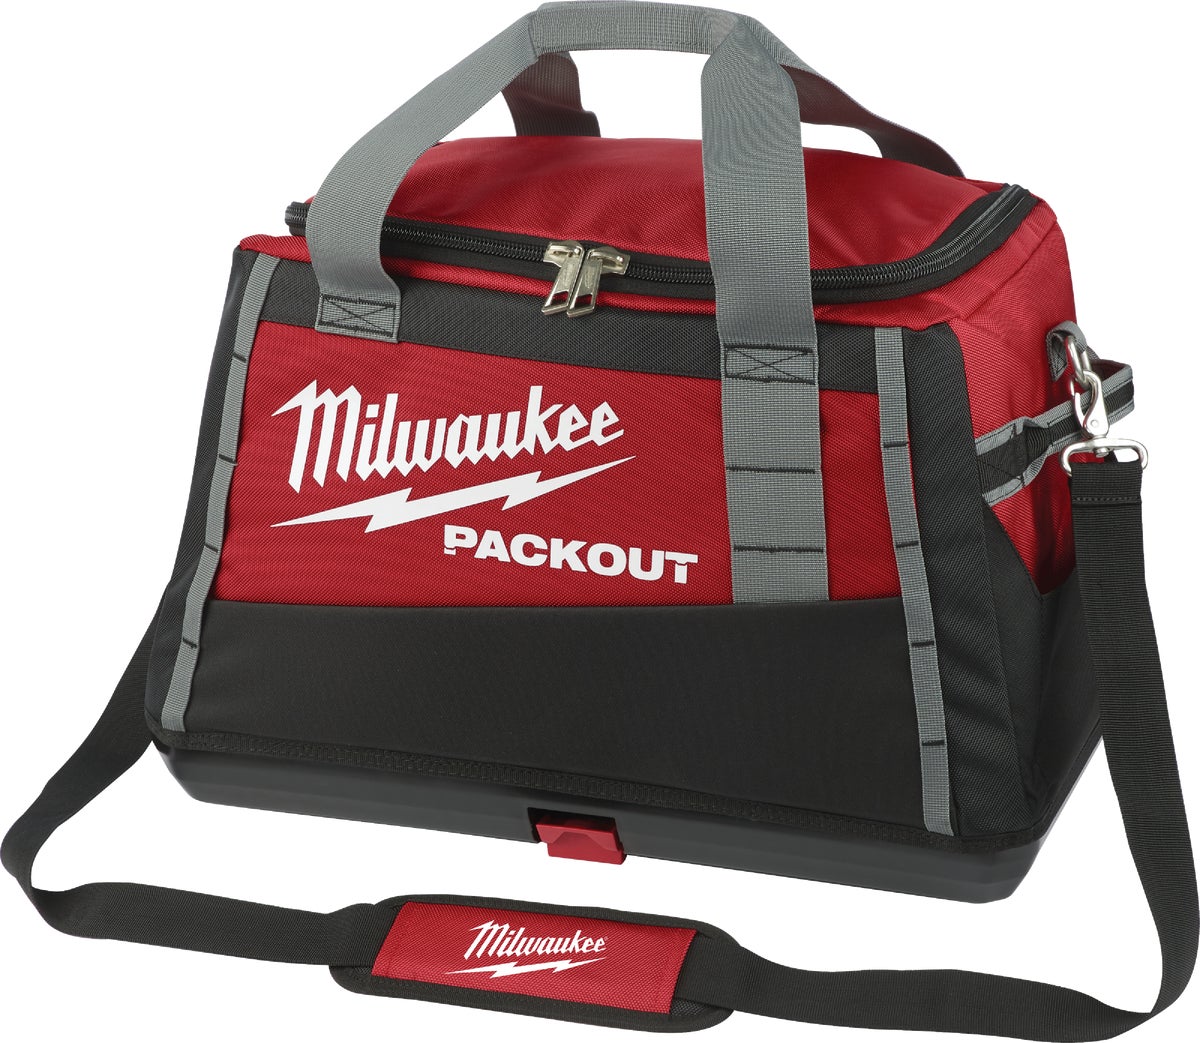 Milwaukee 932464085 PACKOUT Tote Tool Bag 40cm Red & 0 932464083 PACKOUT Compact Organiser Case Red